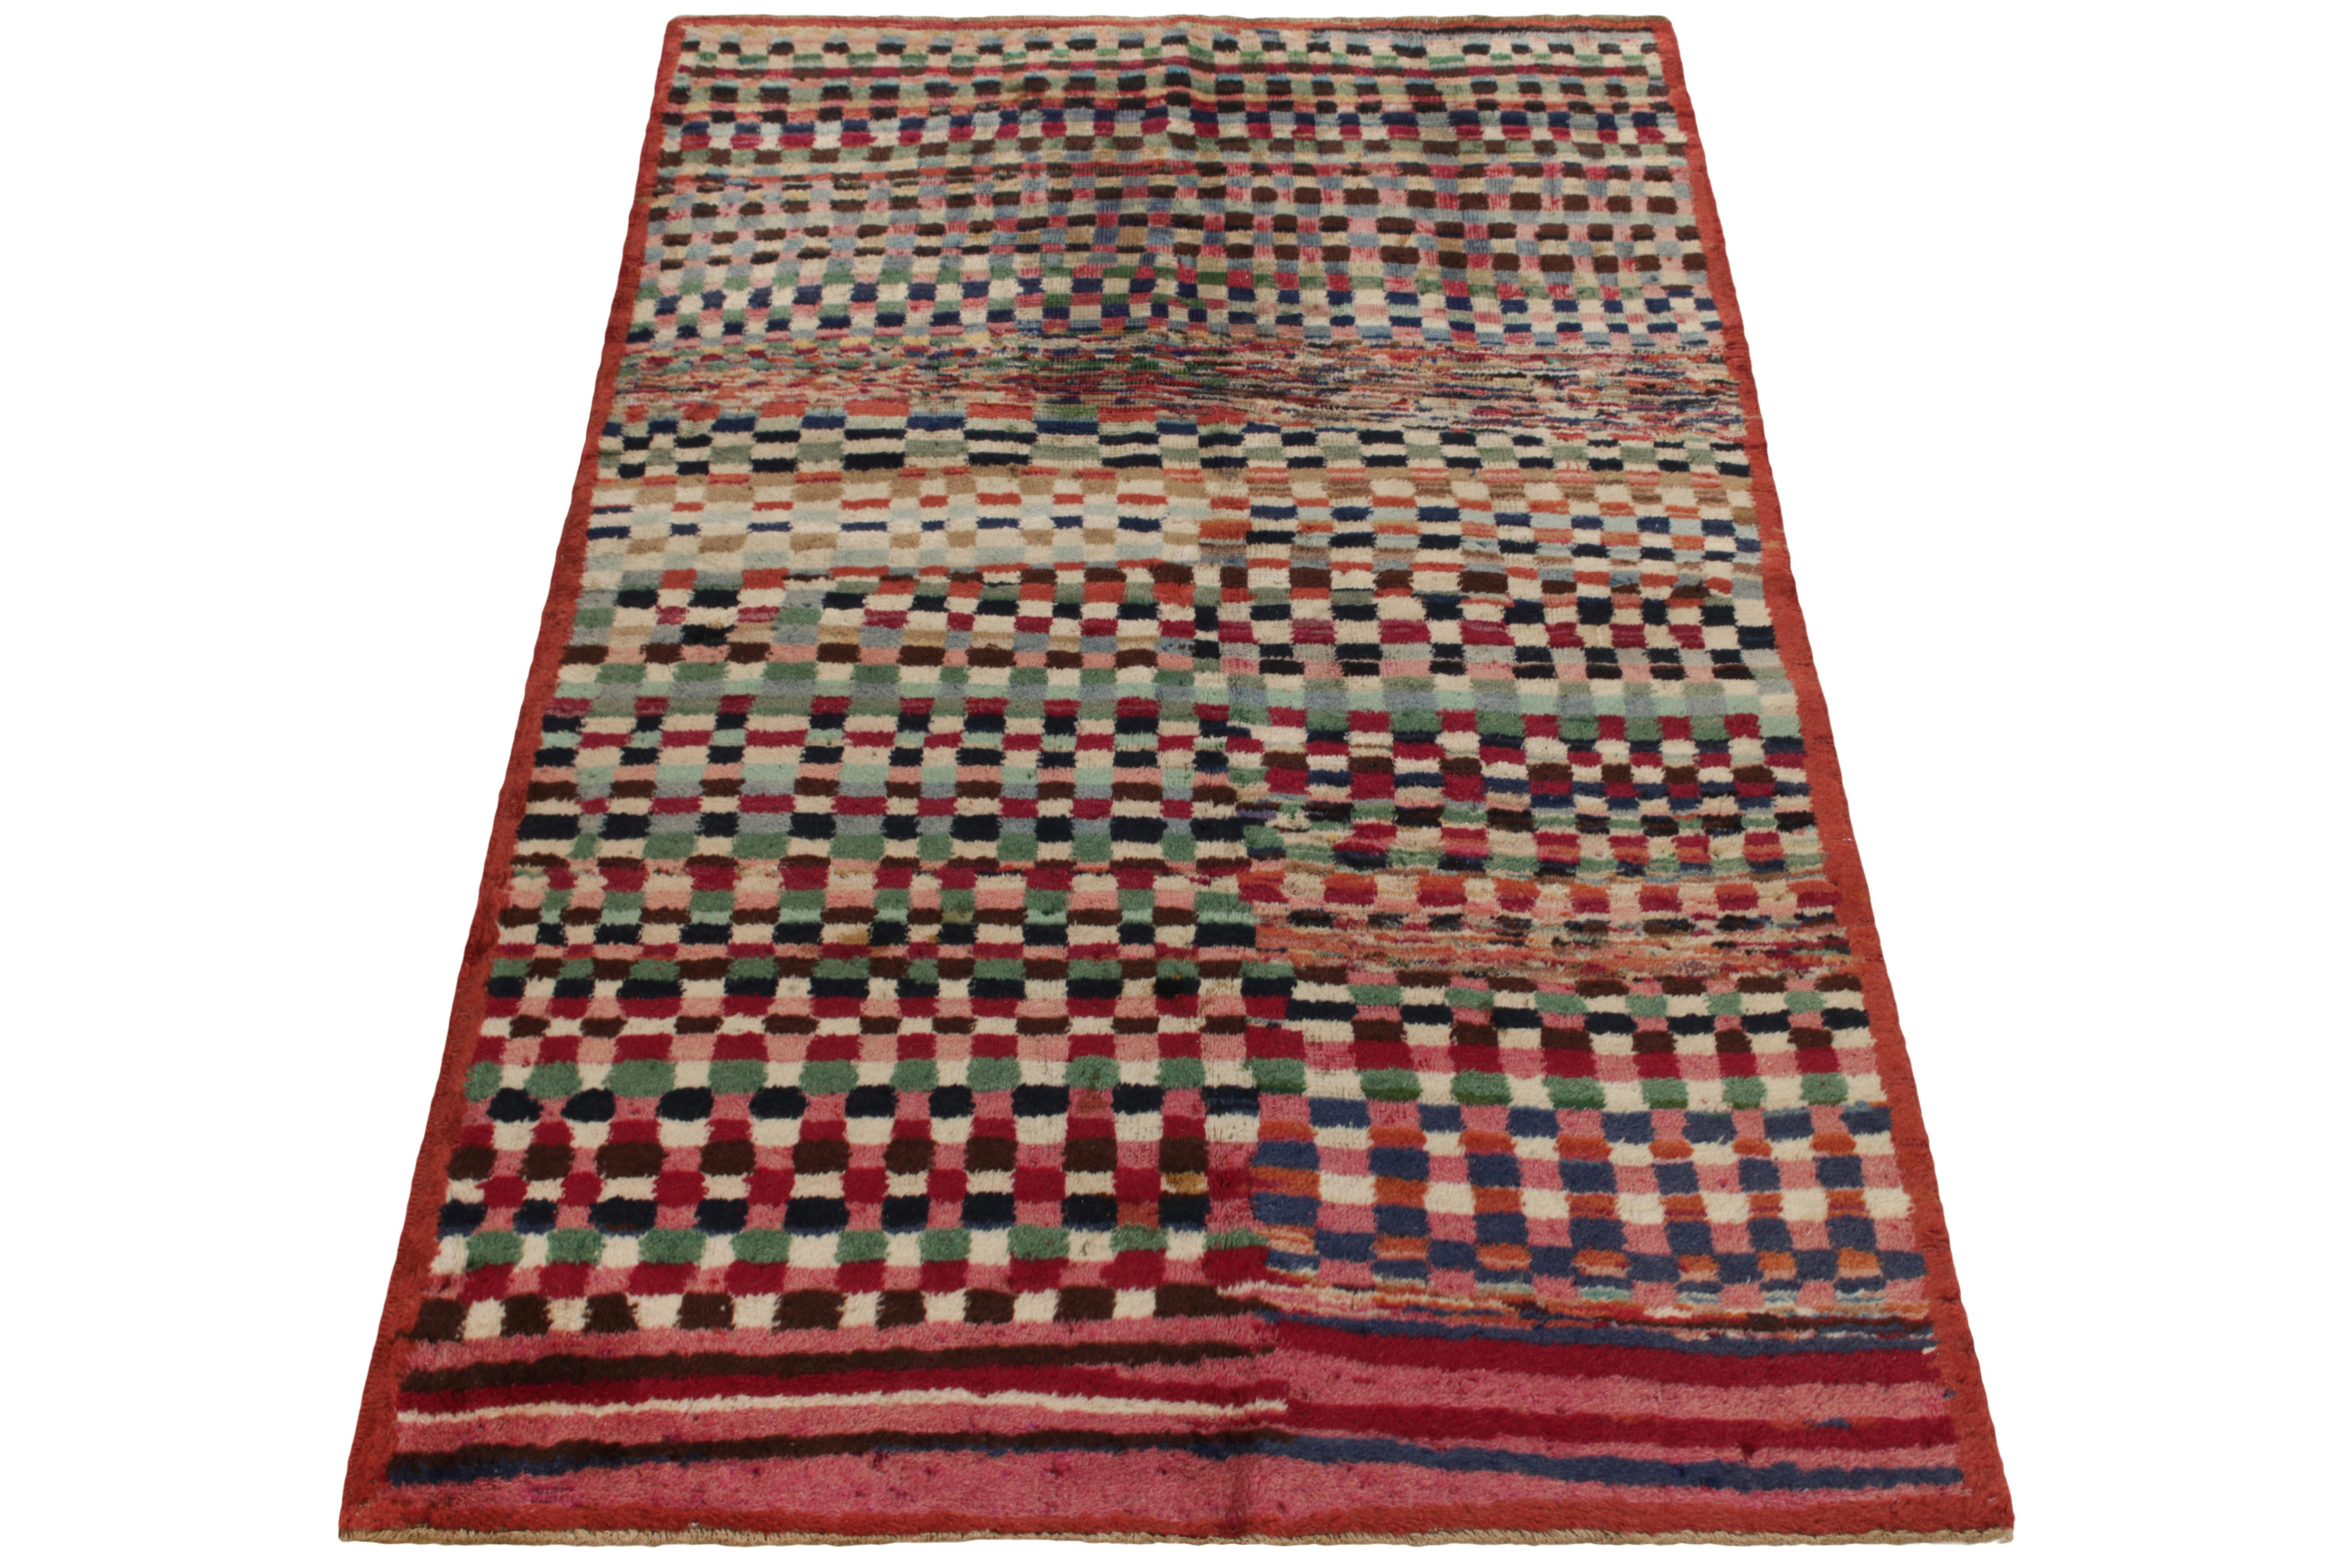 Hand-knotted in wool, a 4x6 vintage rug from a bold Turkish designer, commemorated in Rug & Kilim’s Mid-Century Pasha Collection. Featuring a repetitive geometric pattern in variegated mature tones, the rug reads dextrous juxtaposition in bright red